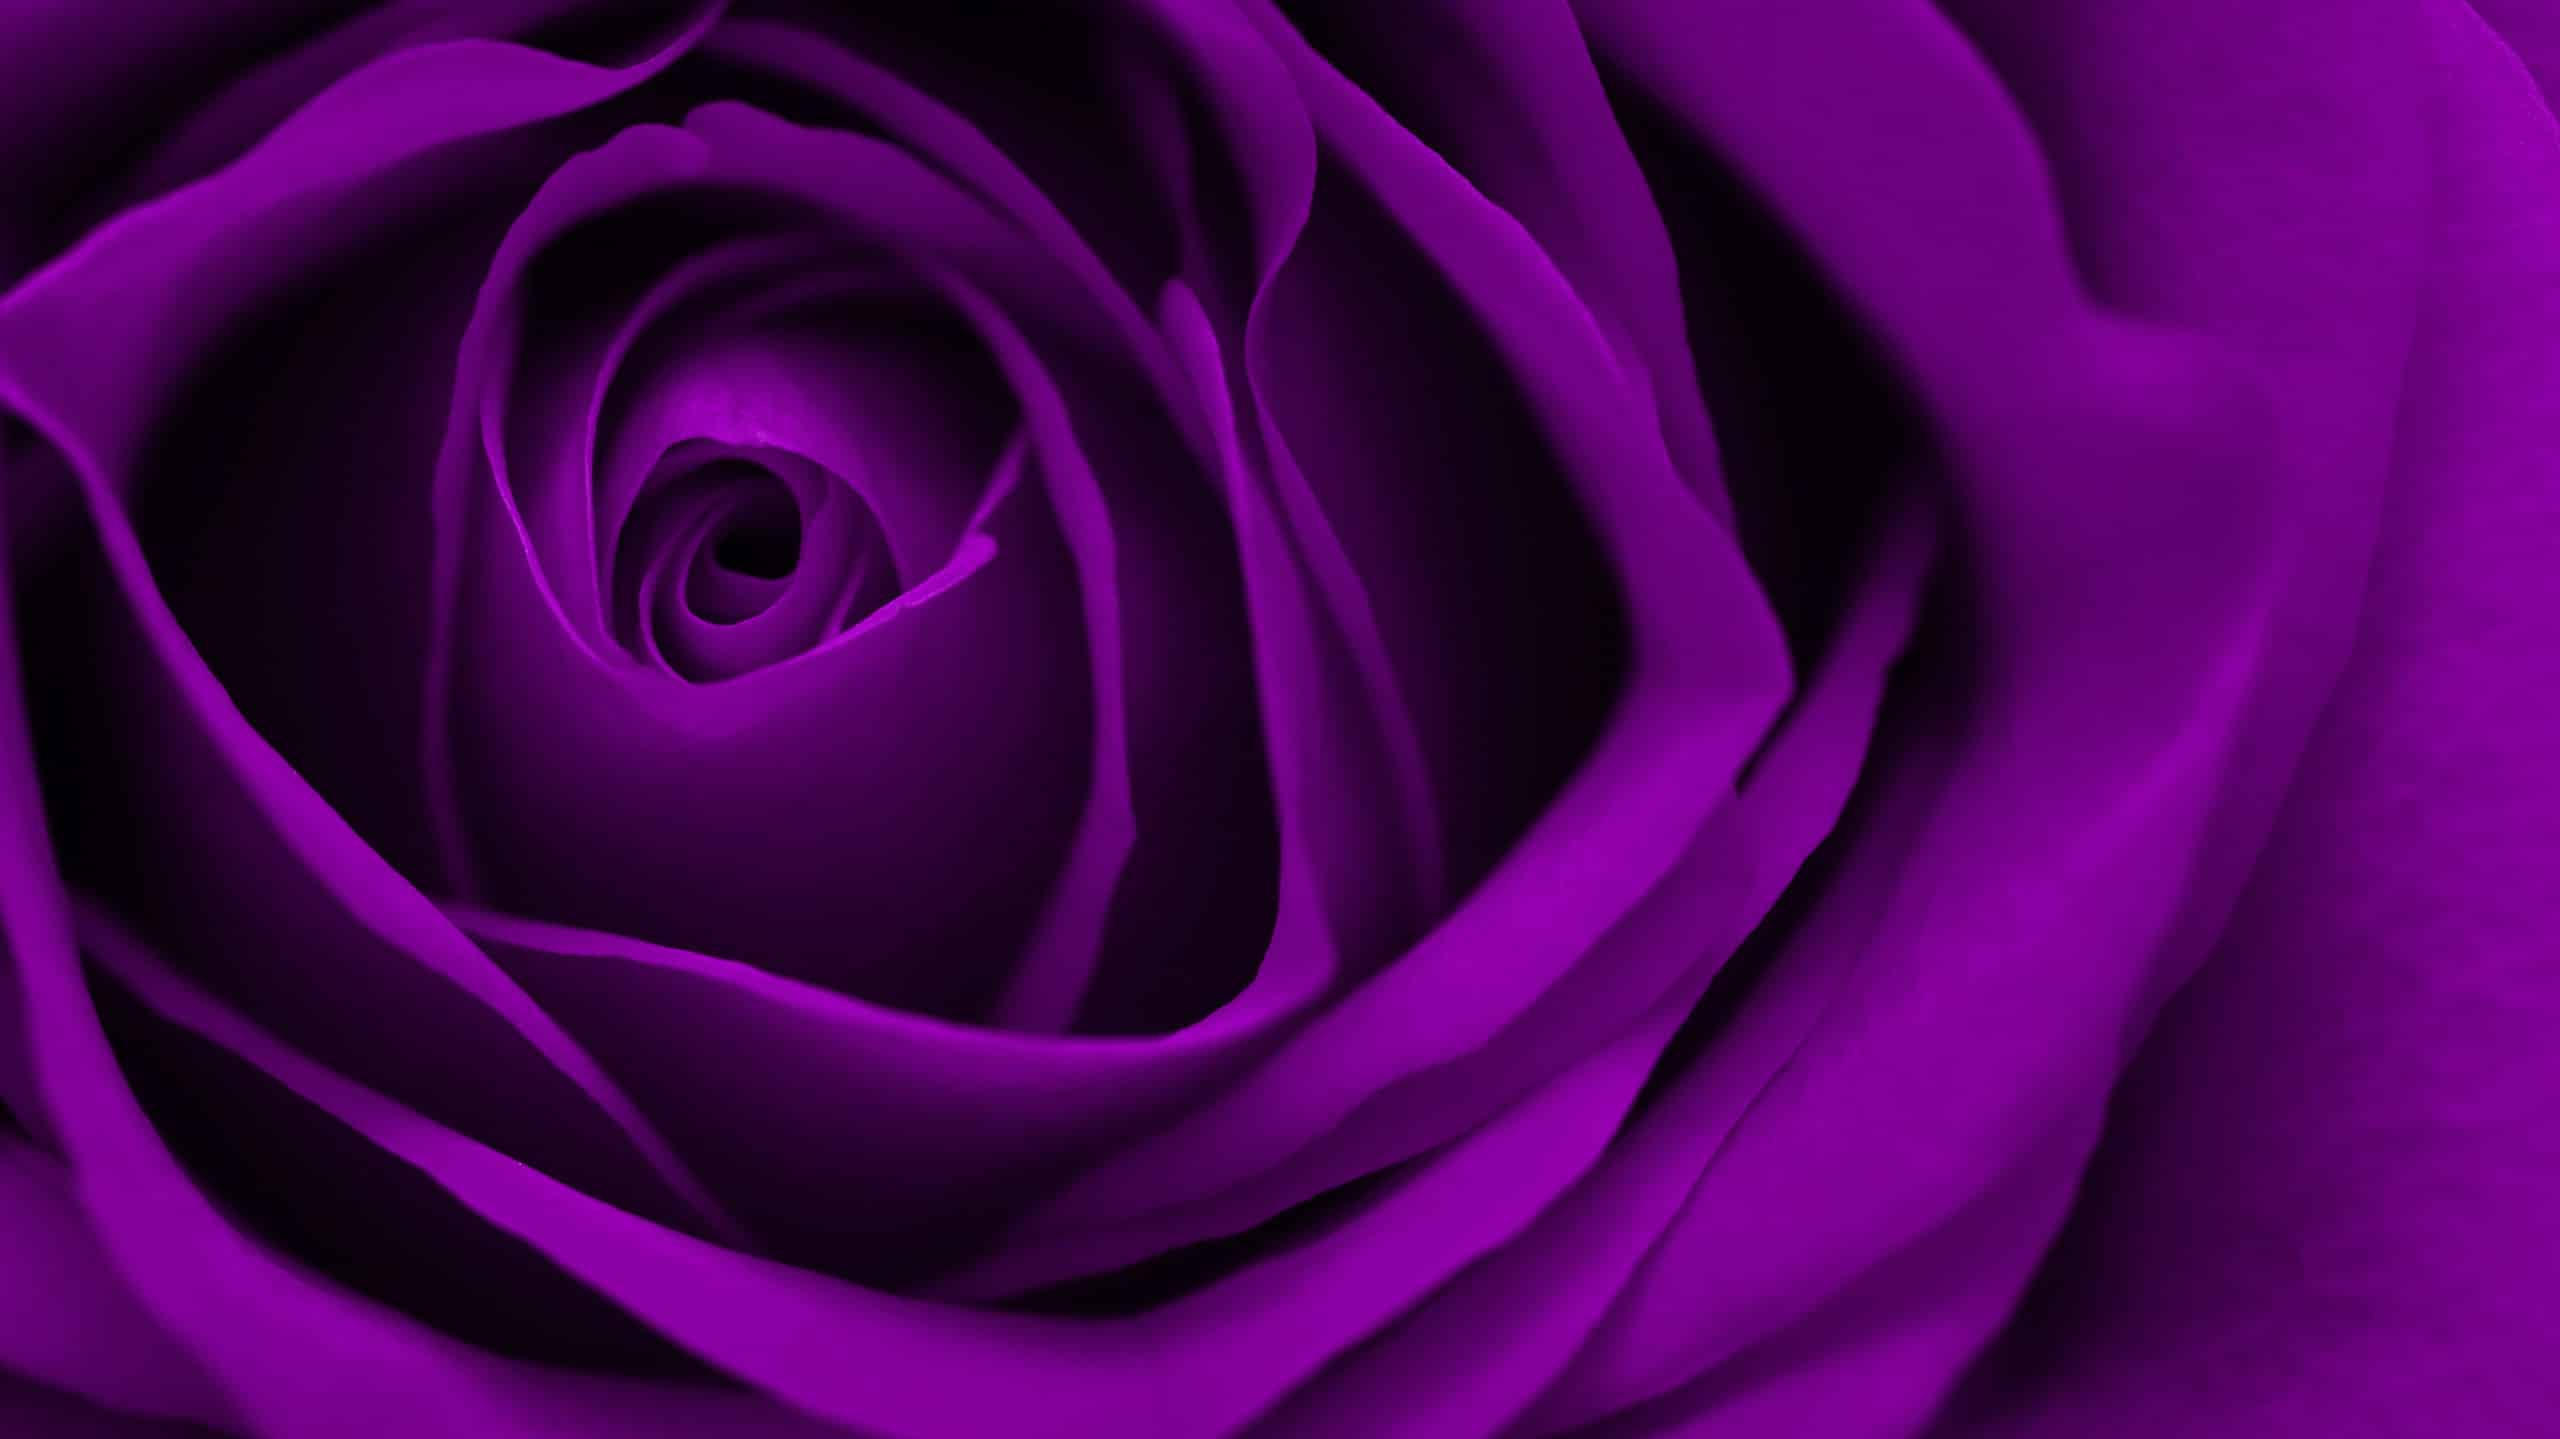 the most beautiful purple rose in the world